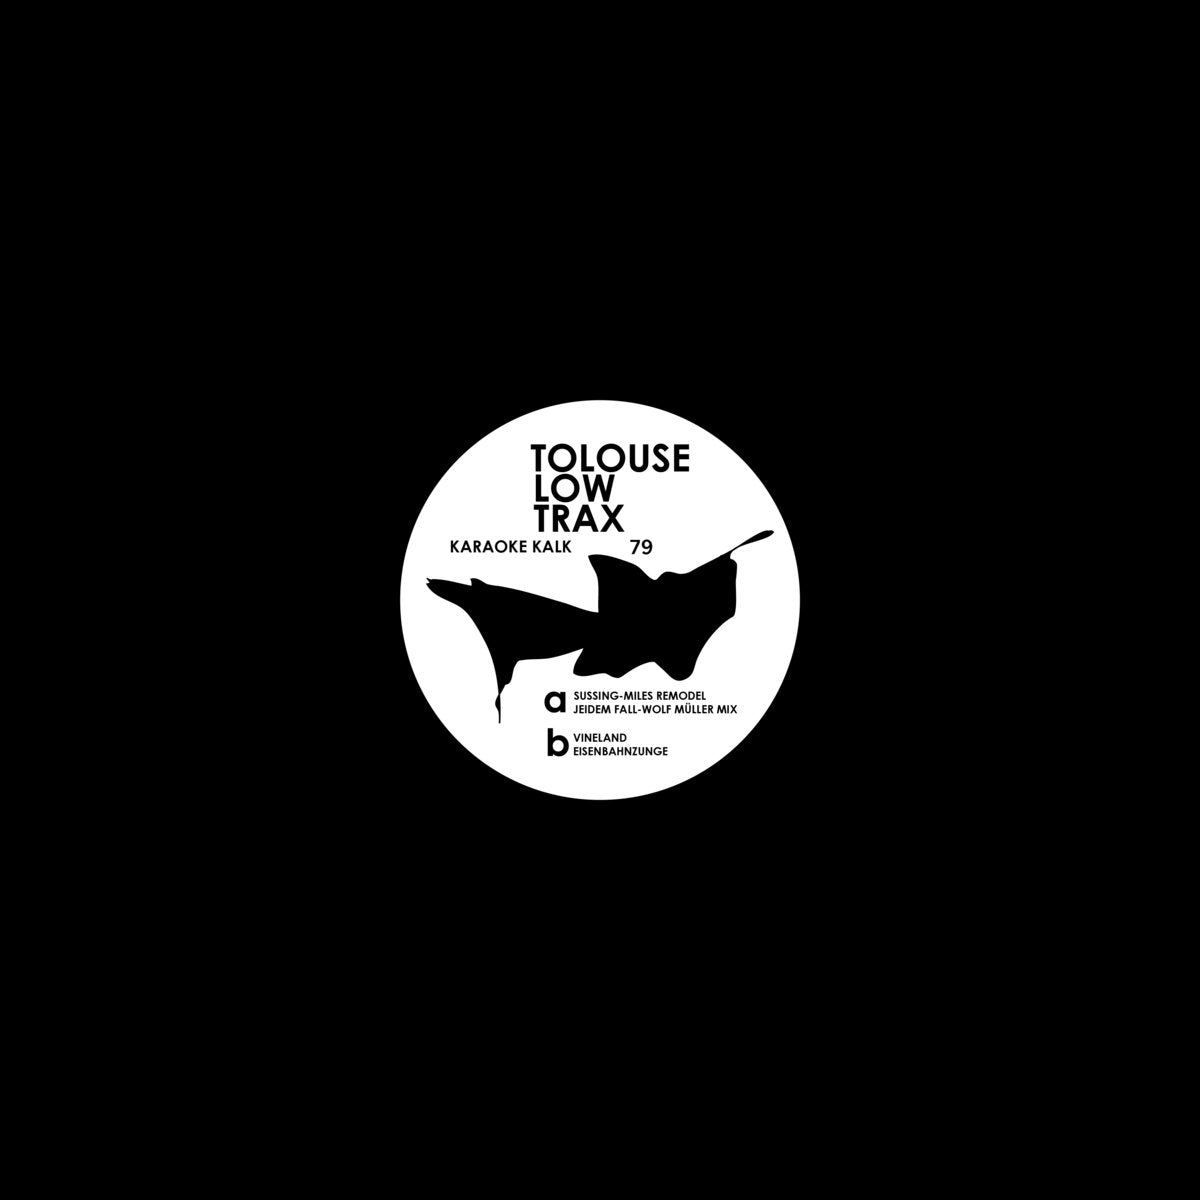 Tolouse Low Trax - Untitled